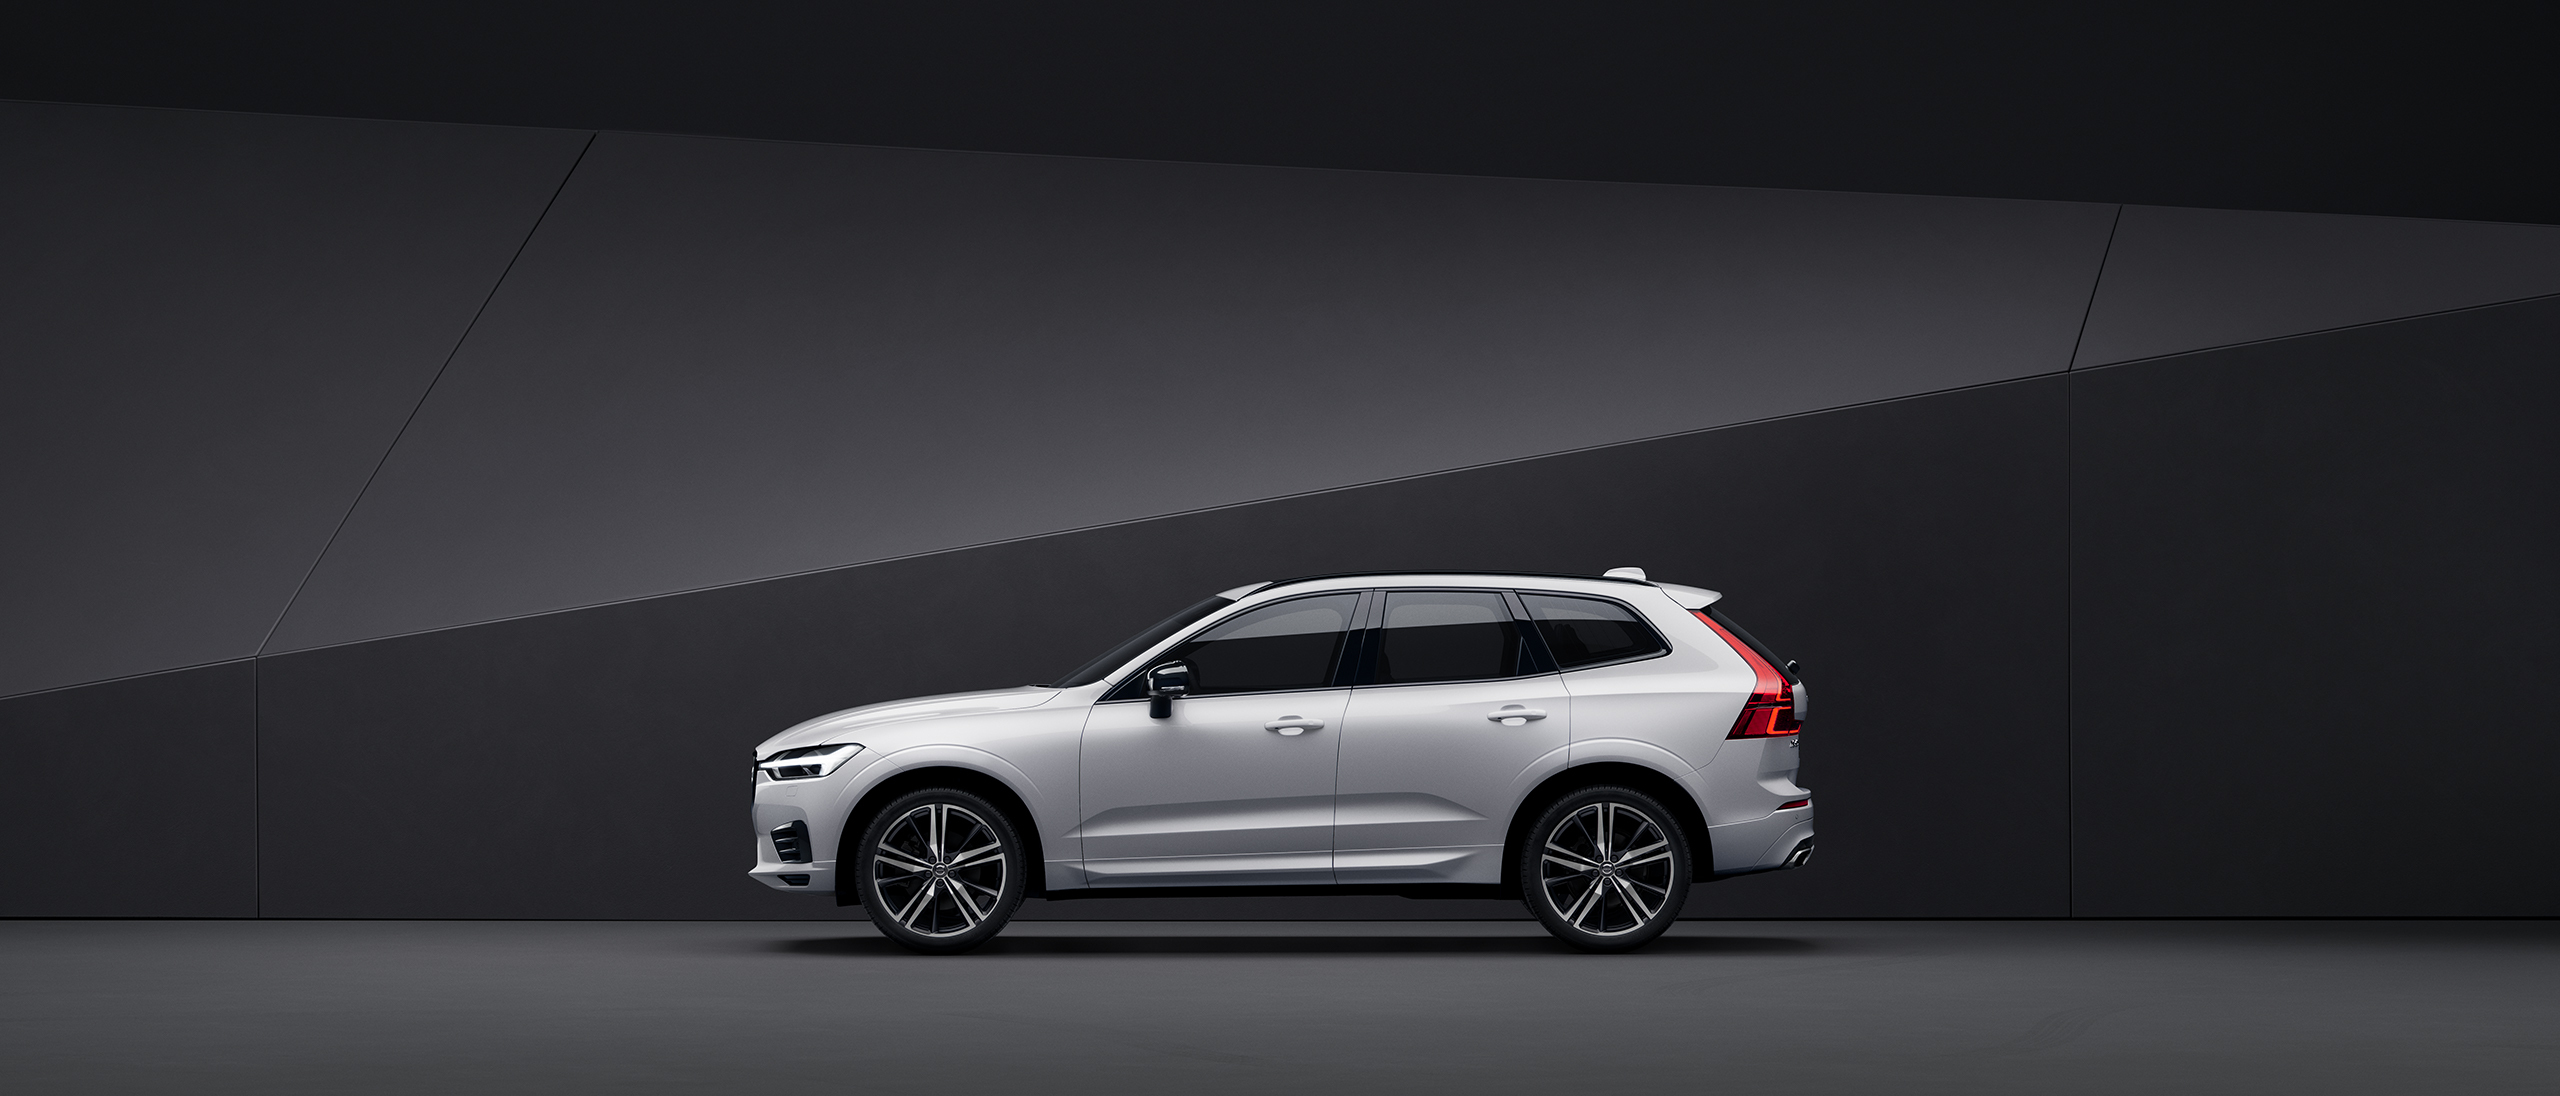 Side view of a silver Volvo XC60 parked in a black indoor environment.